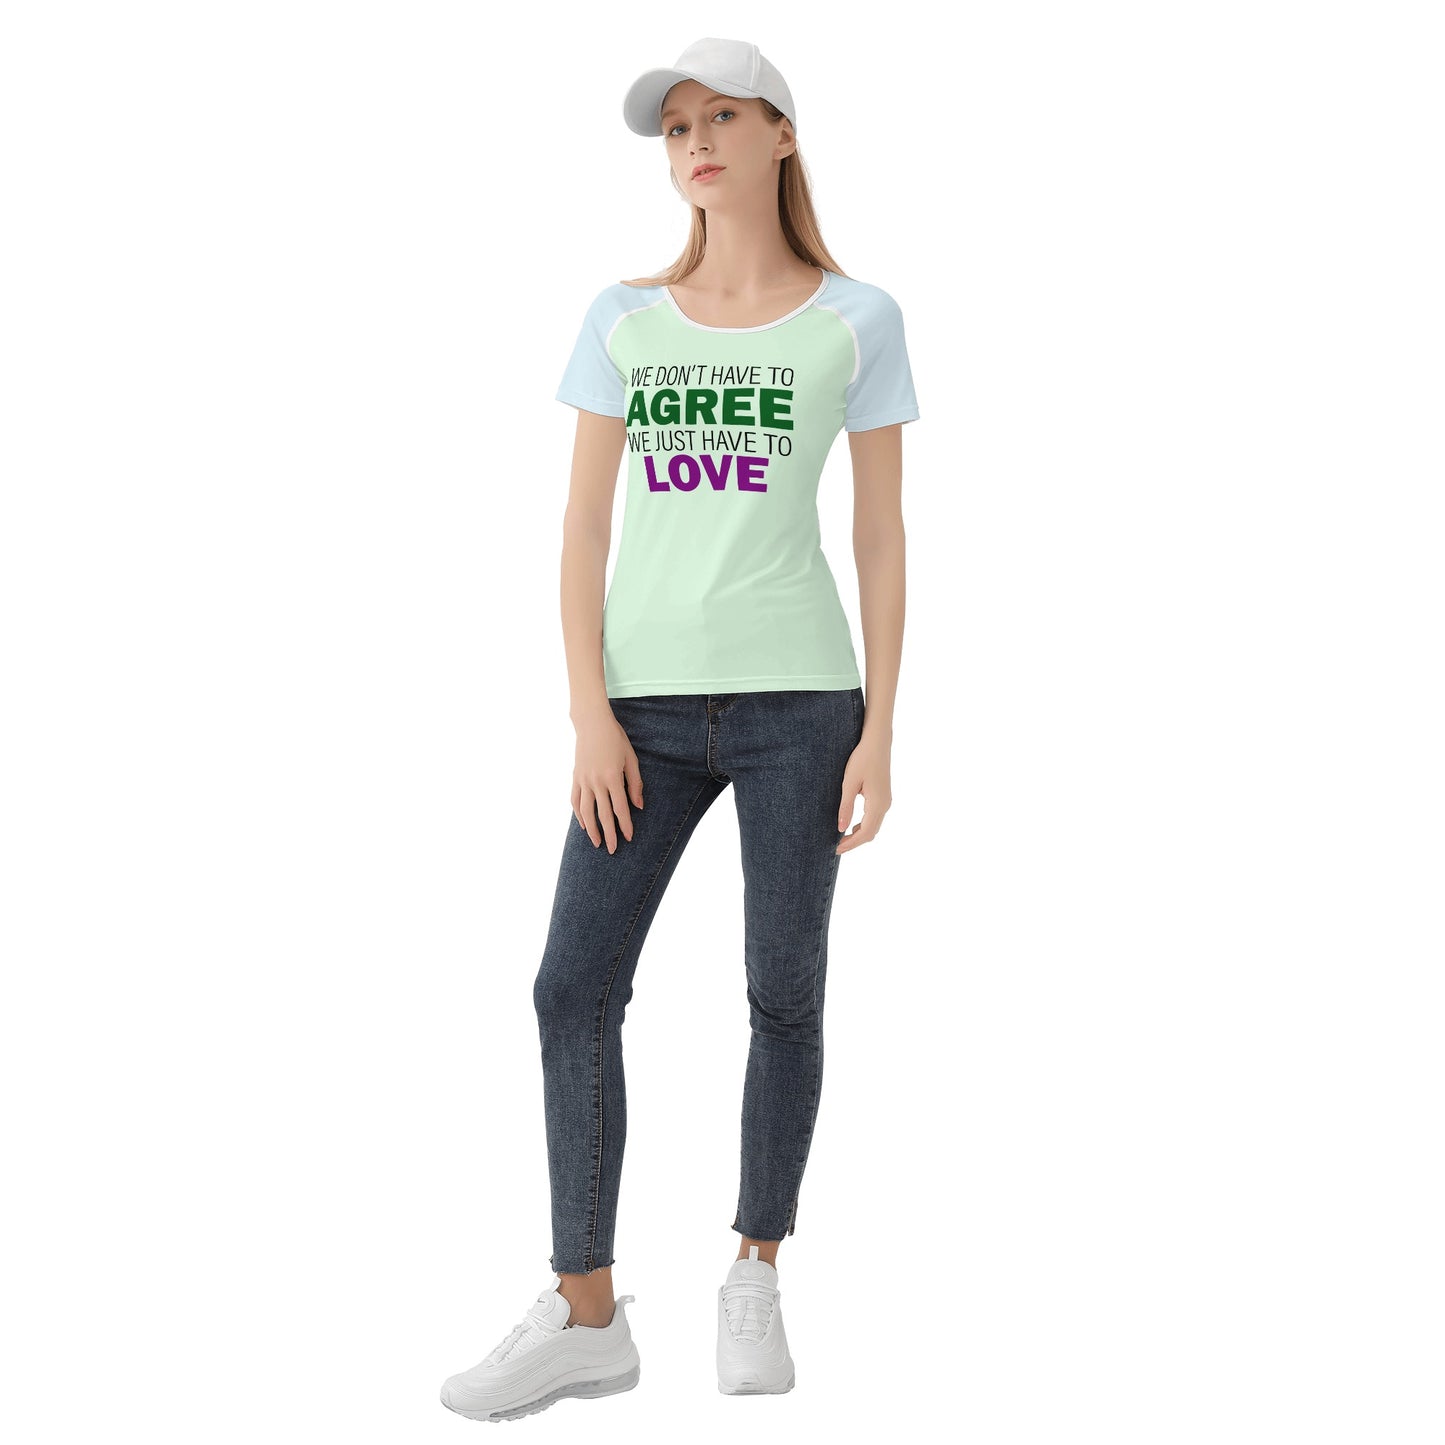 Neduz Womens Just Love T-shirt: Spread Love with Style